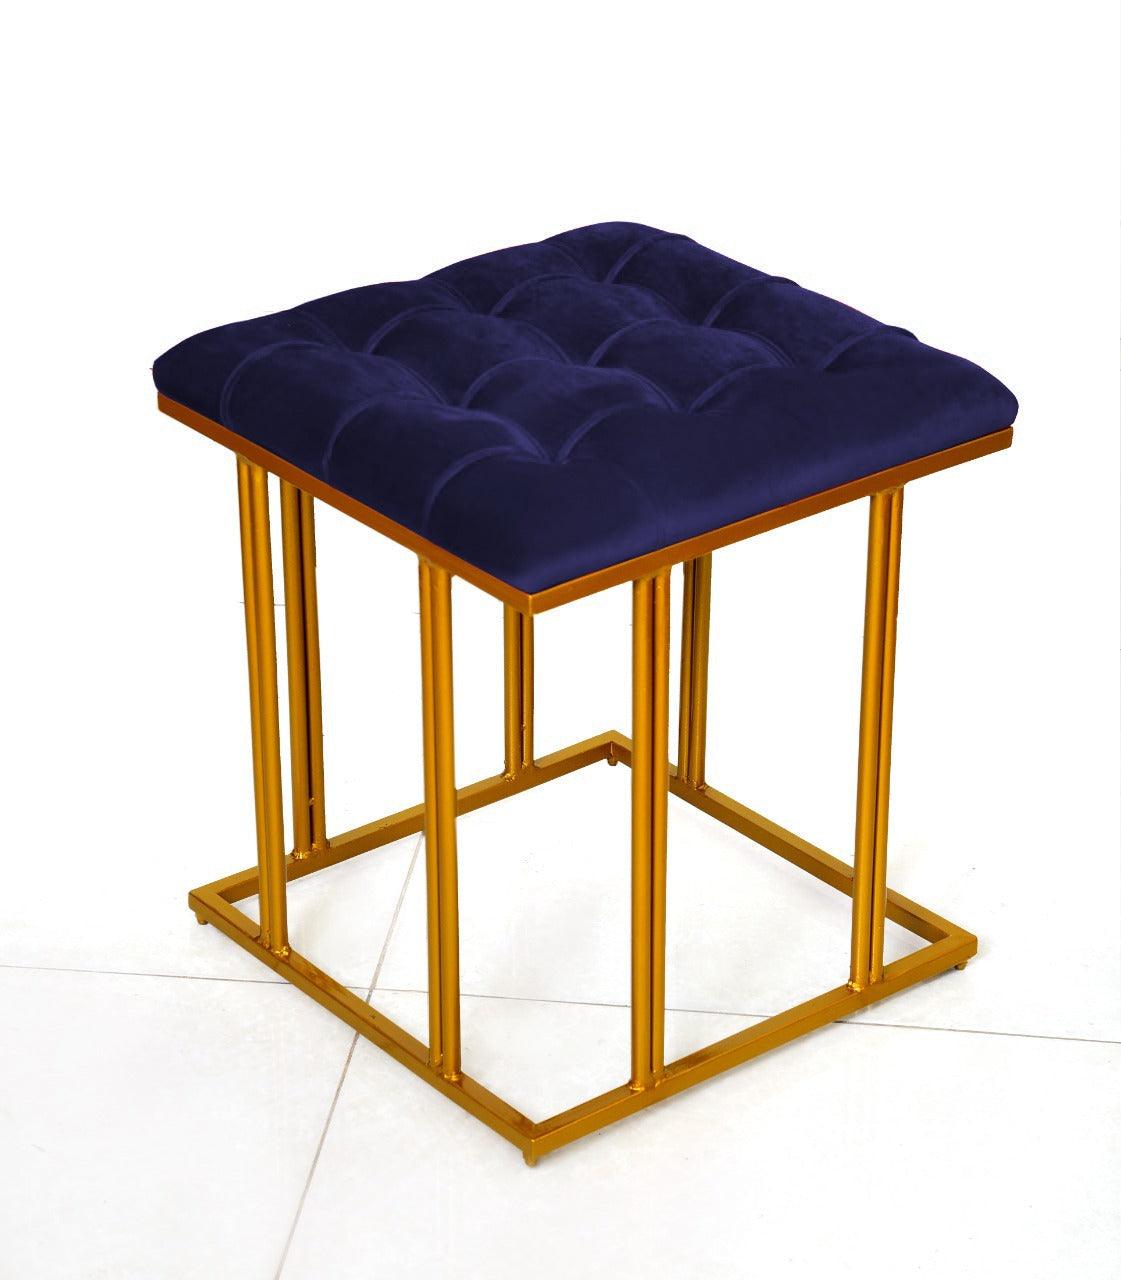 Luxury Velvet Square Stool With Steel Stand -912 - 92Bedding